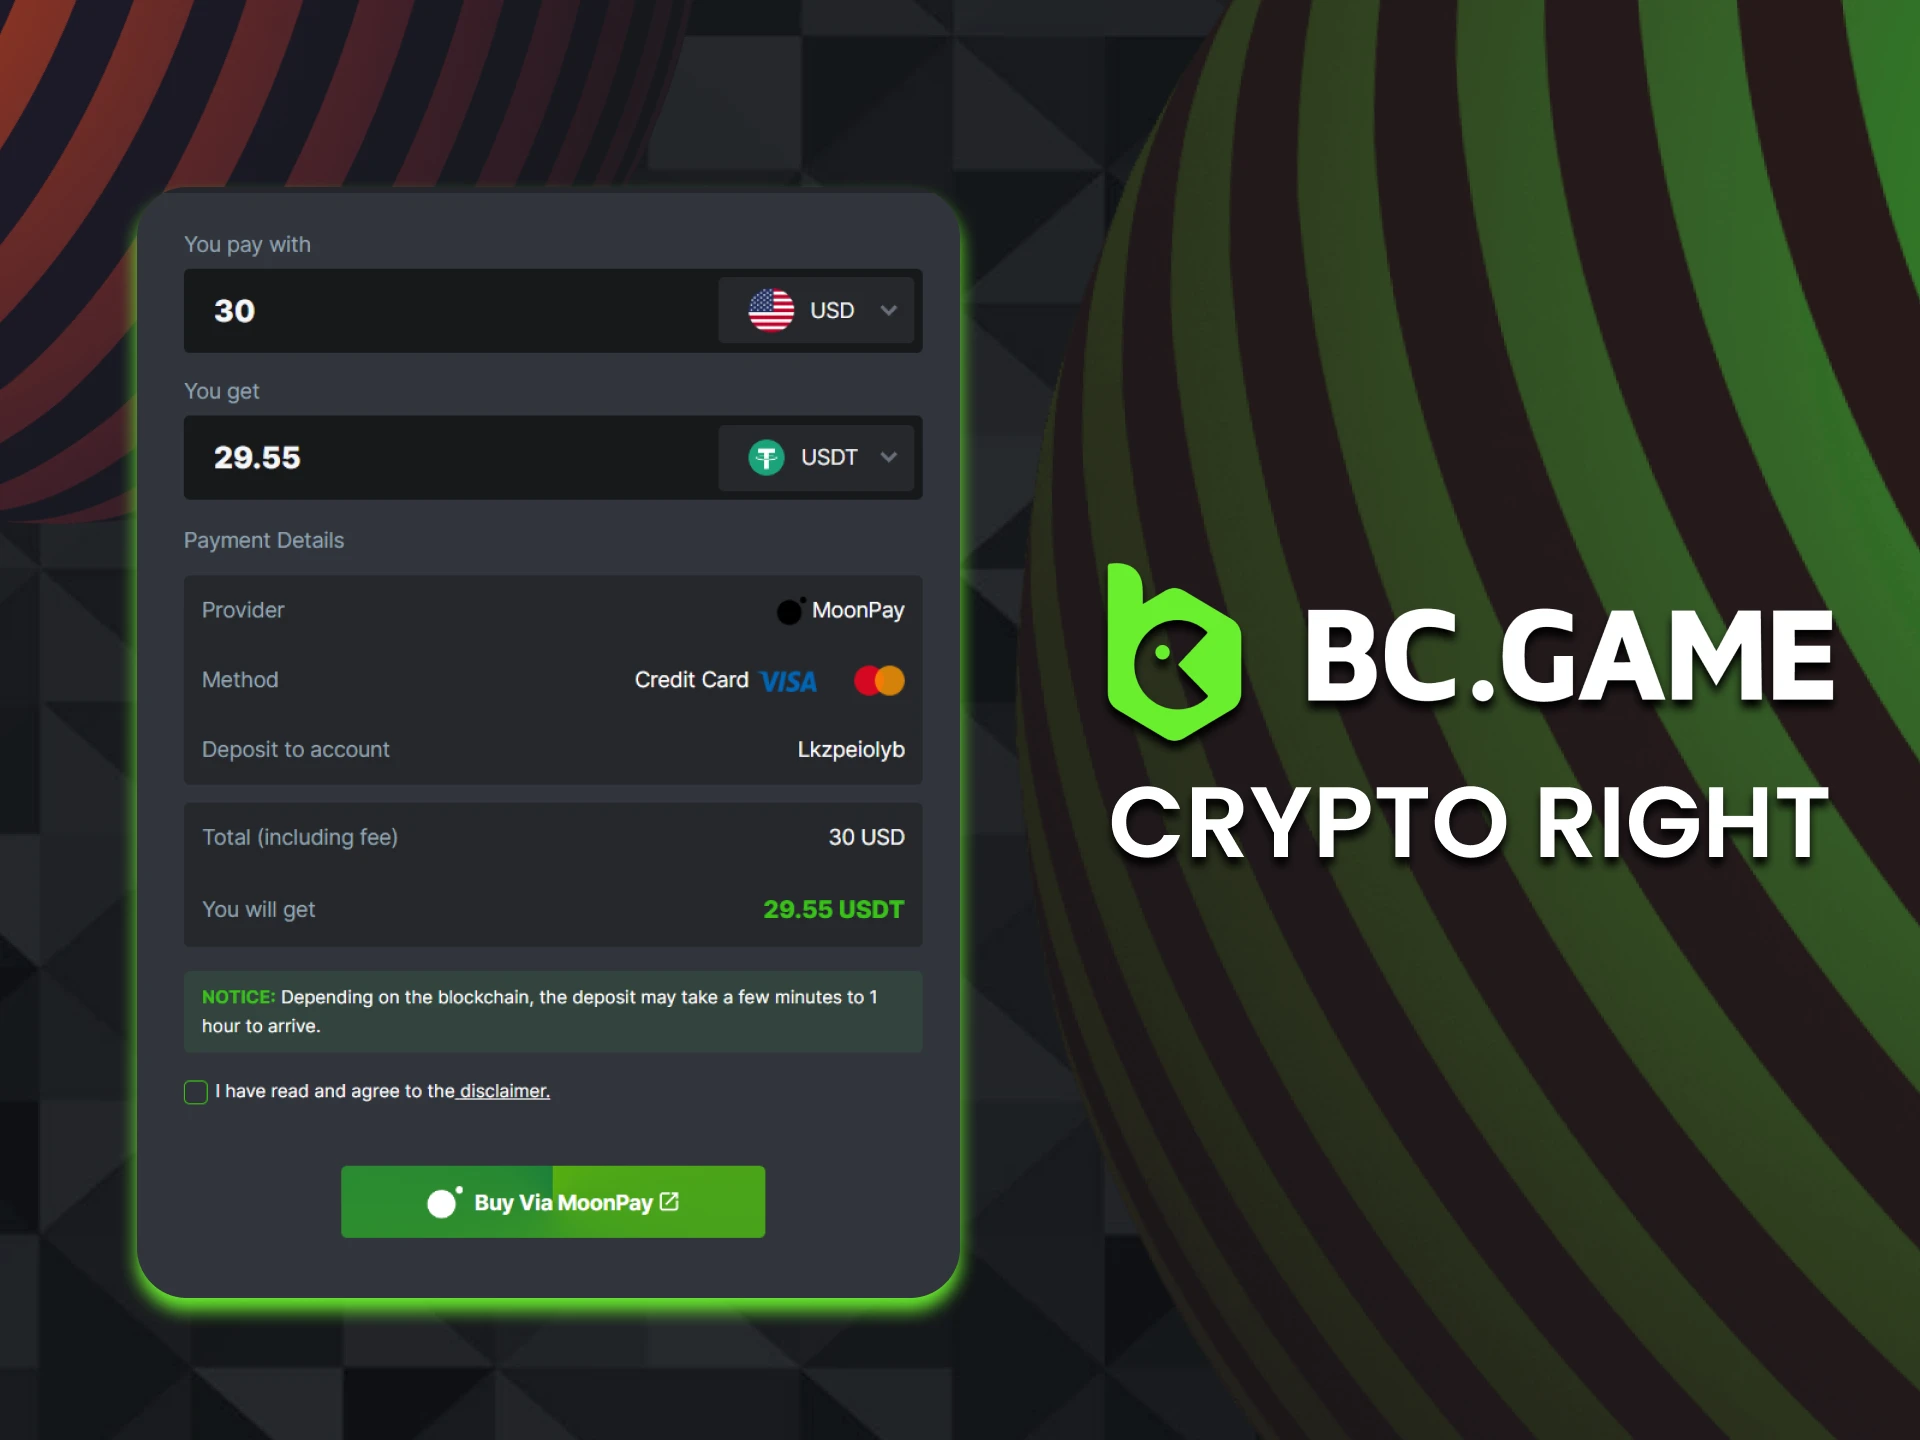 Bangladeshi players can use cryptocurrencies for BC Game deposits.